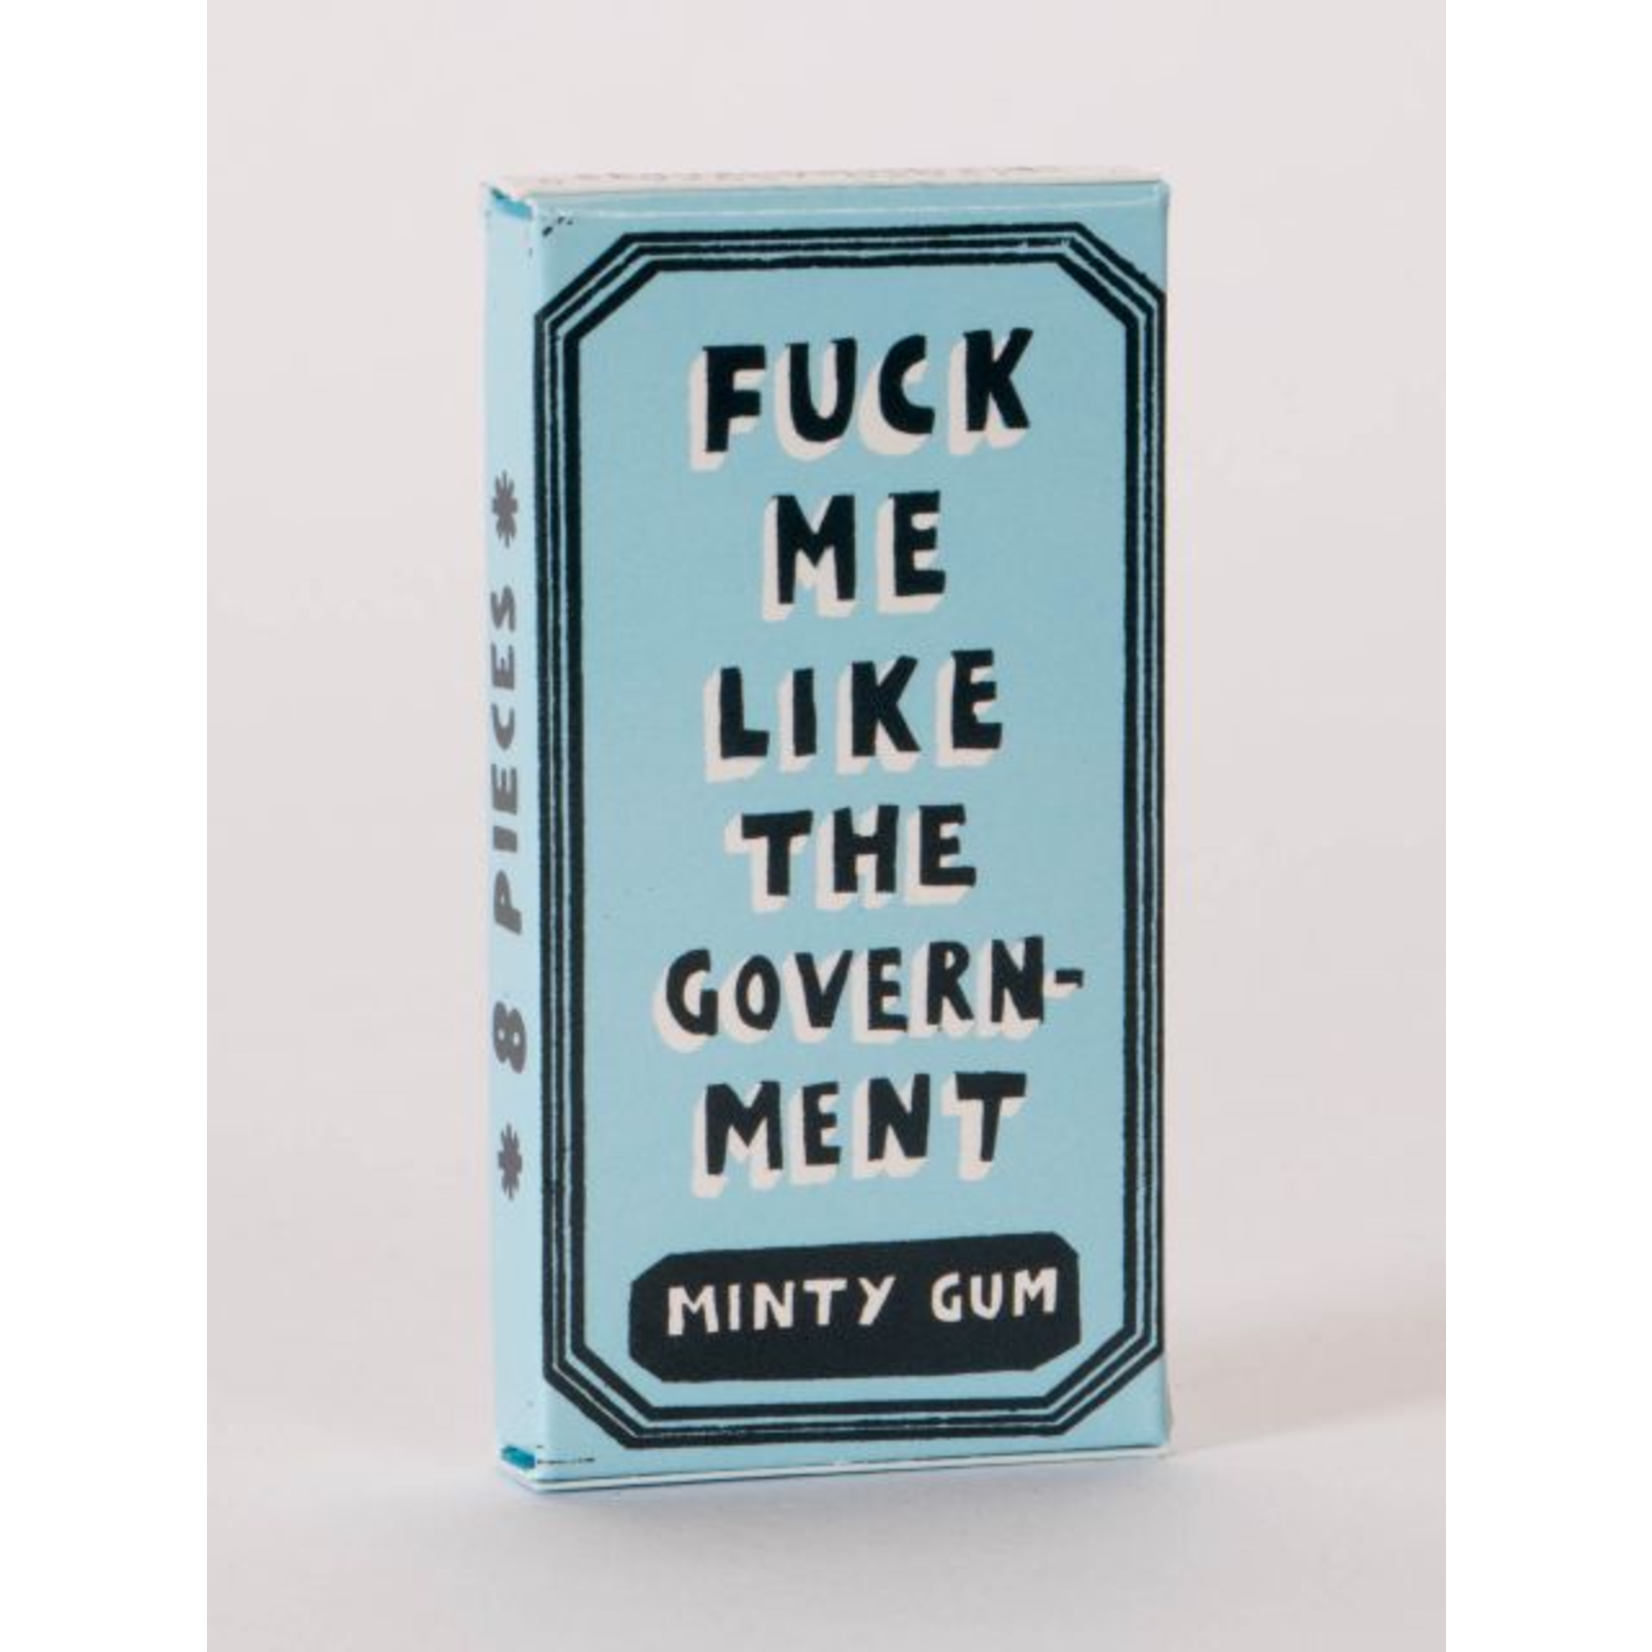 Gum - Fuck Me Like The Government